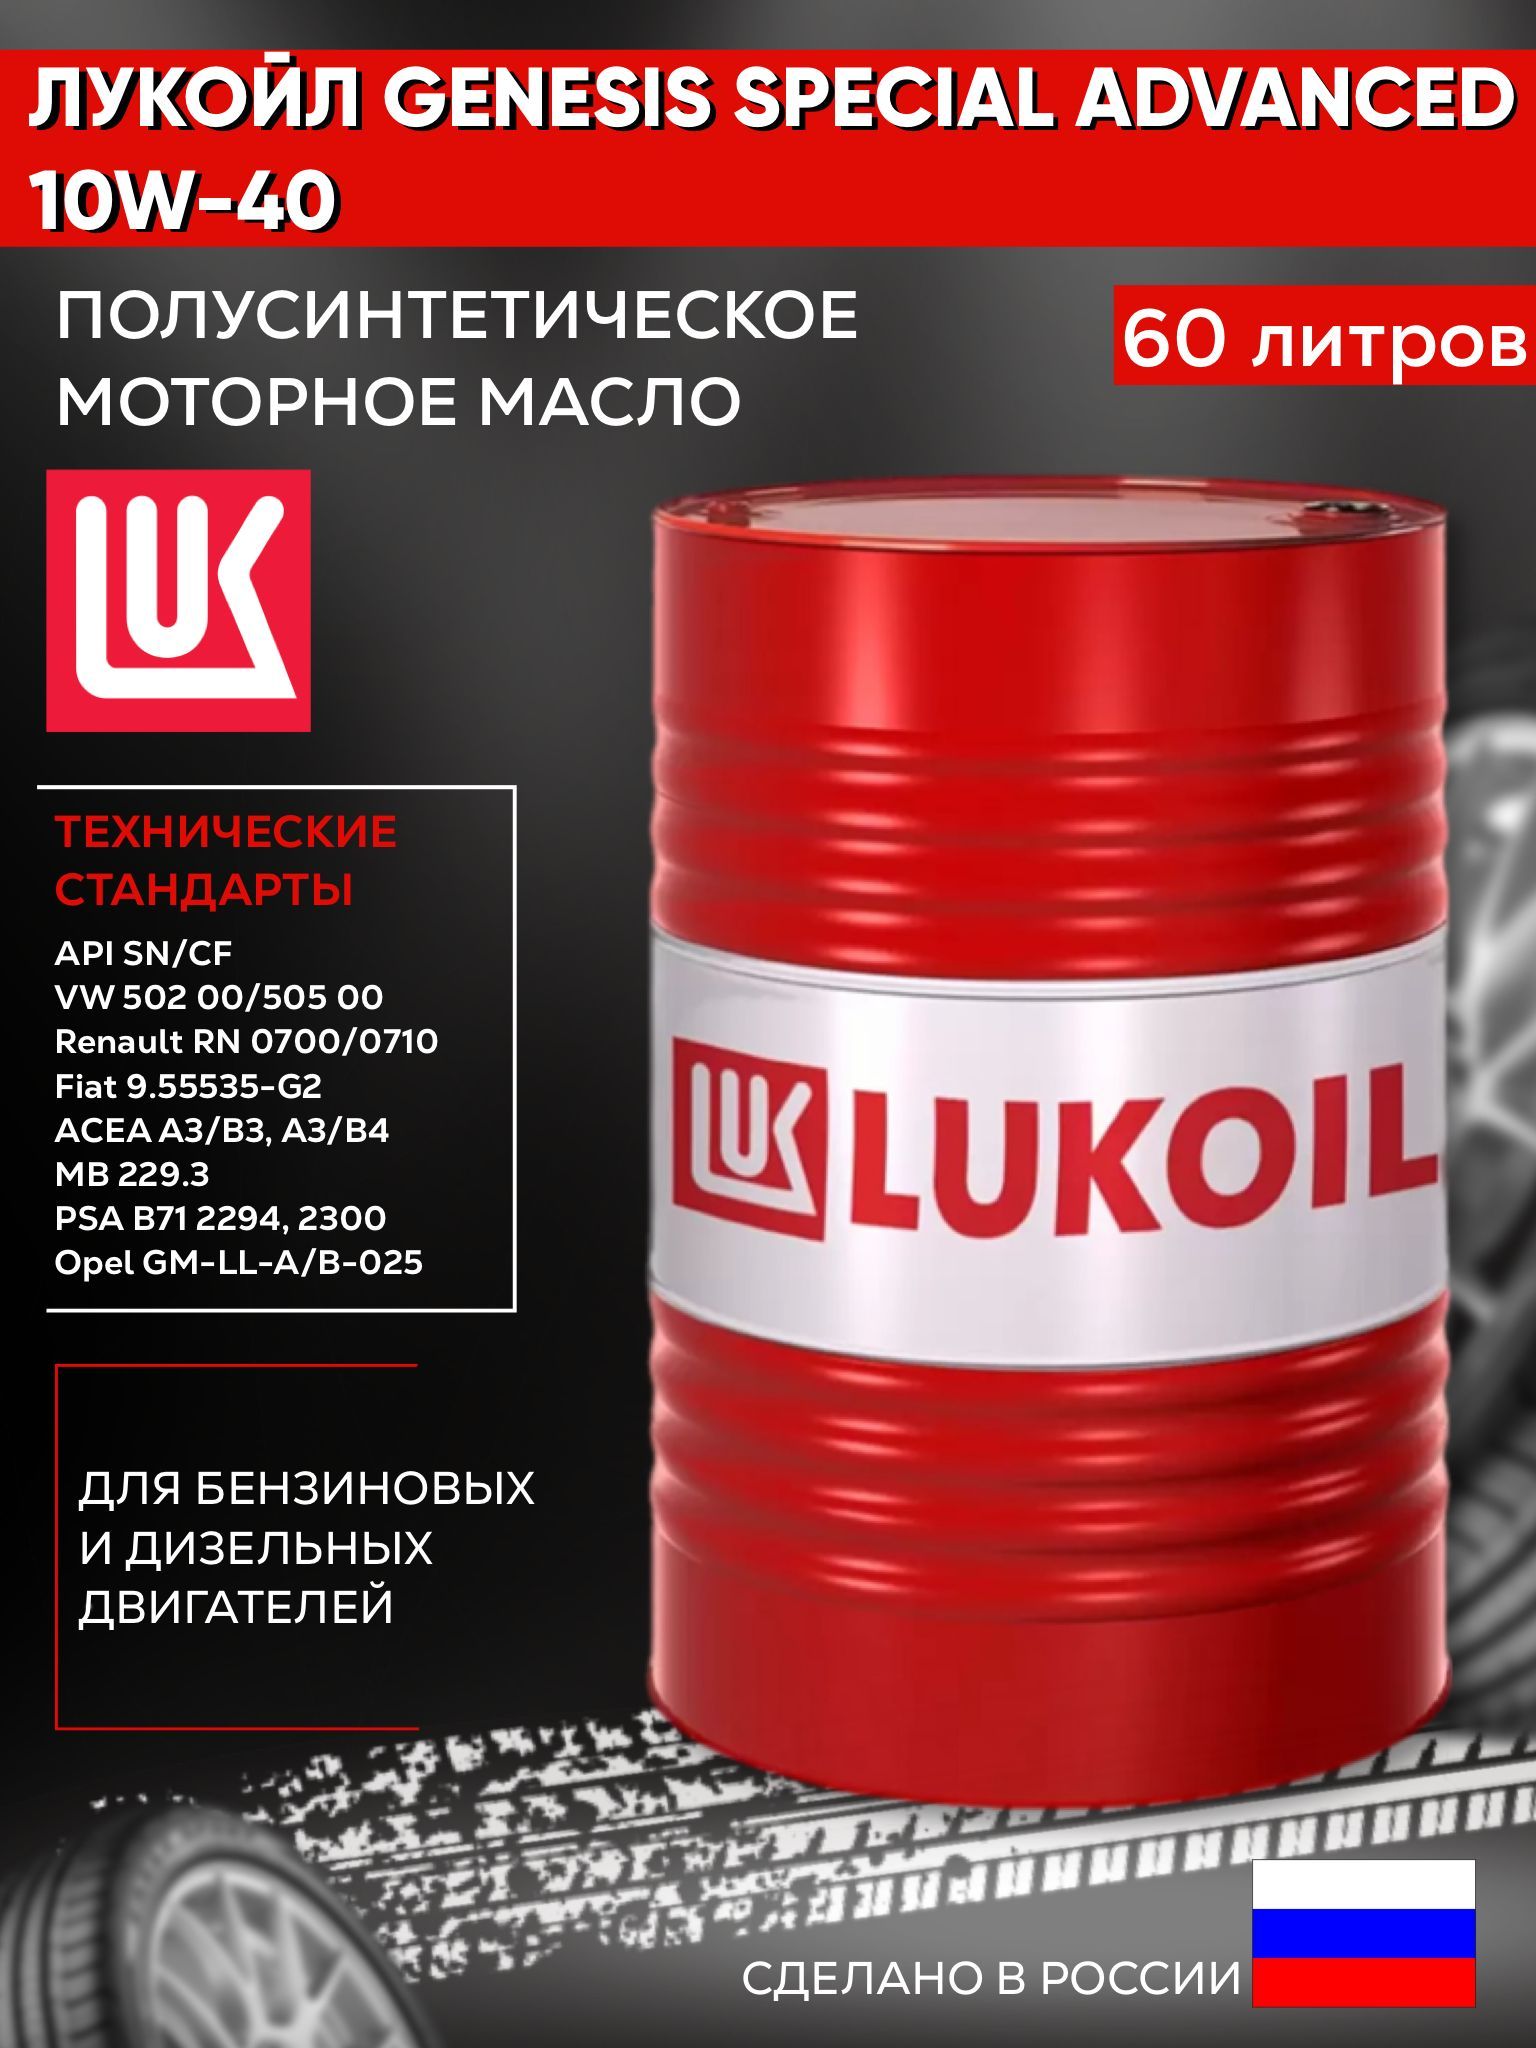 Масло моторное лукойл бочка. Lukoil Genesis Special Advanced. Бочка Лукойл. Бочка Лукойл 200. Купить Genesis Special Advanced 10w-40.